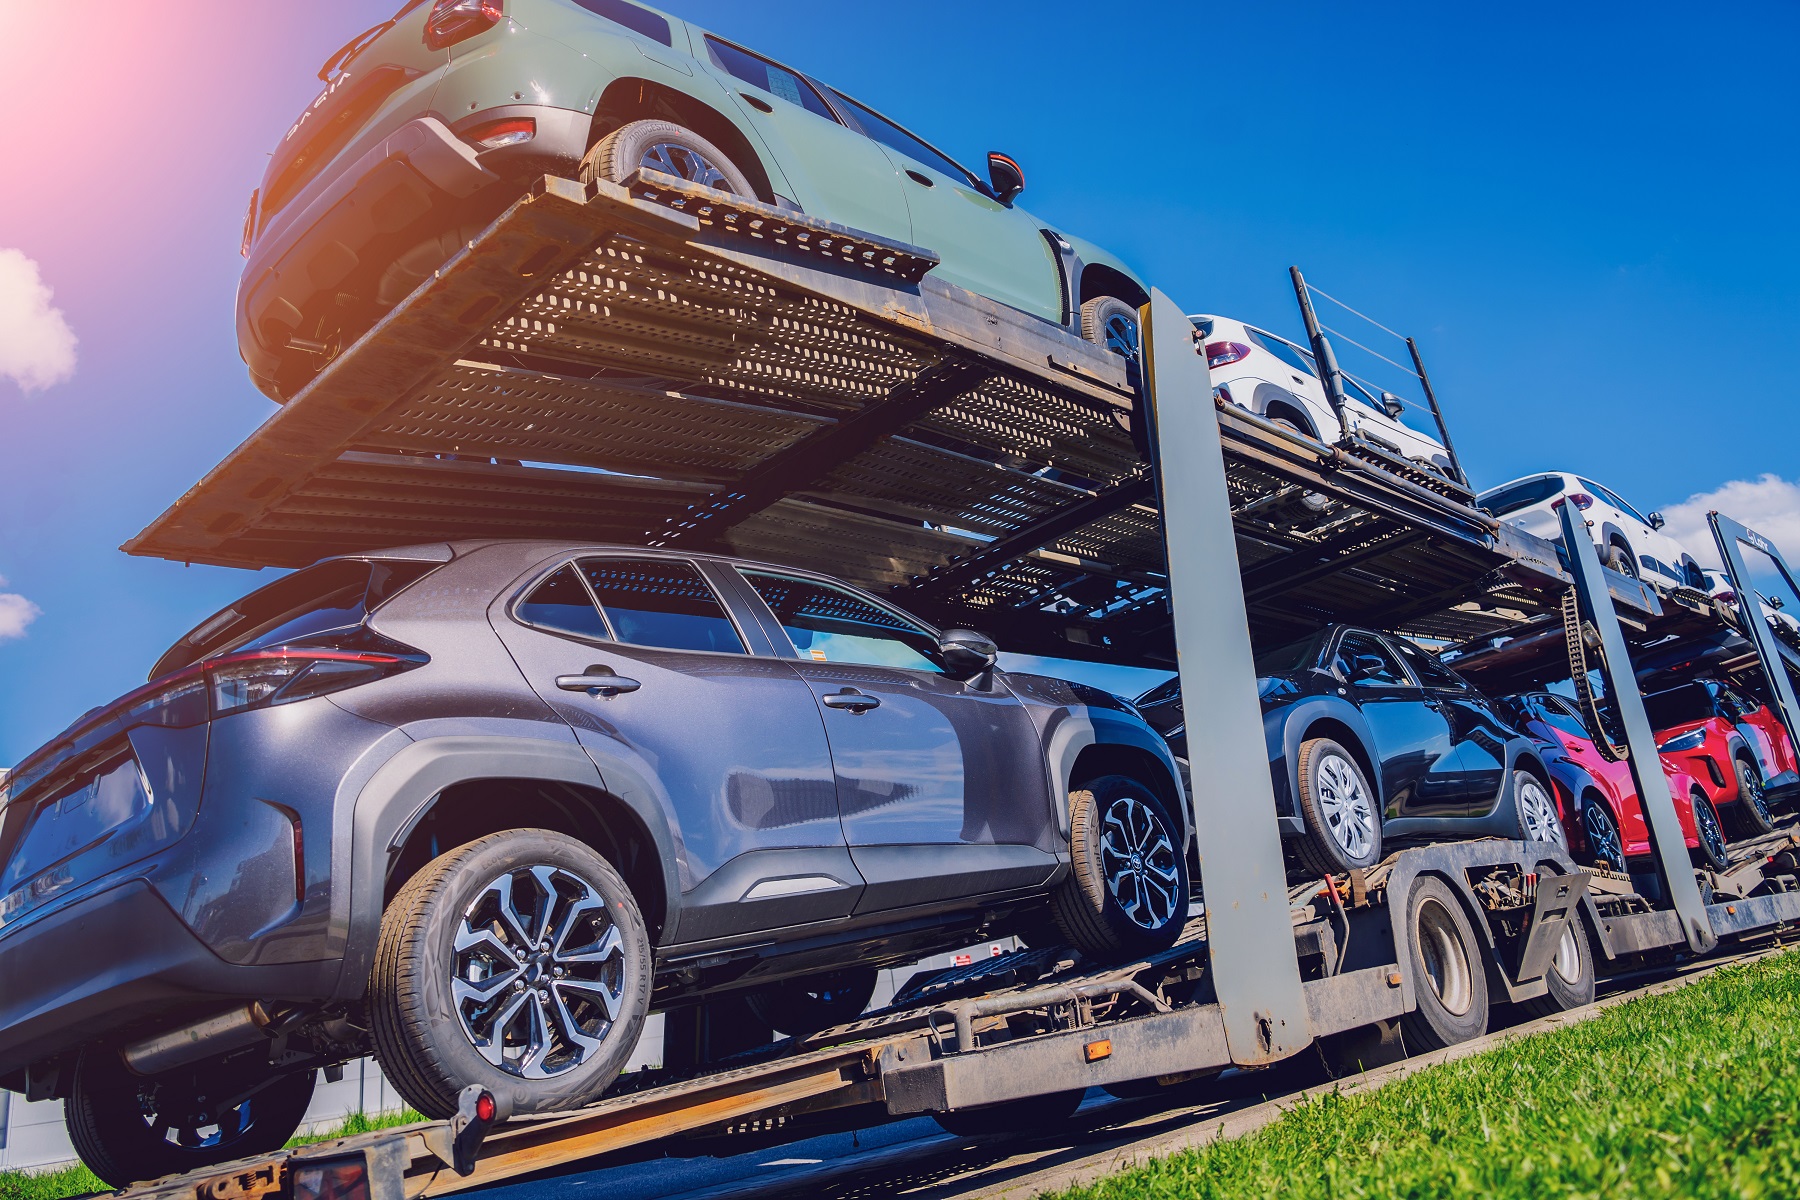 Article Don't Just Ship It, AutoHauler It: Why Car-Specific Logistics Make All the Difference